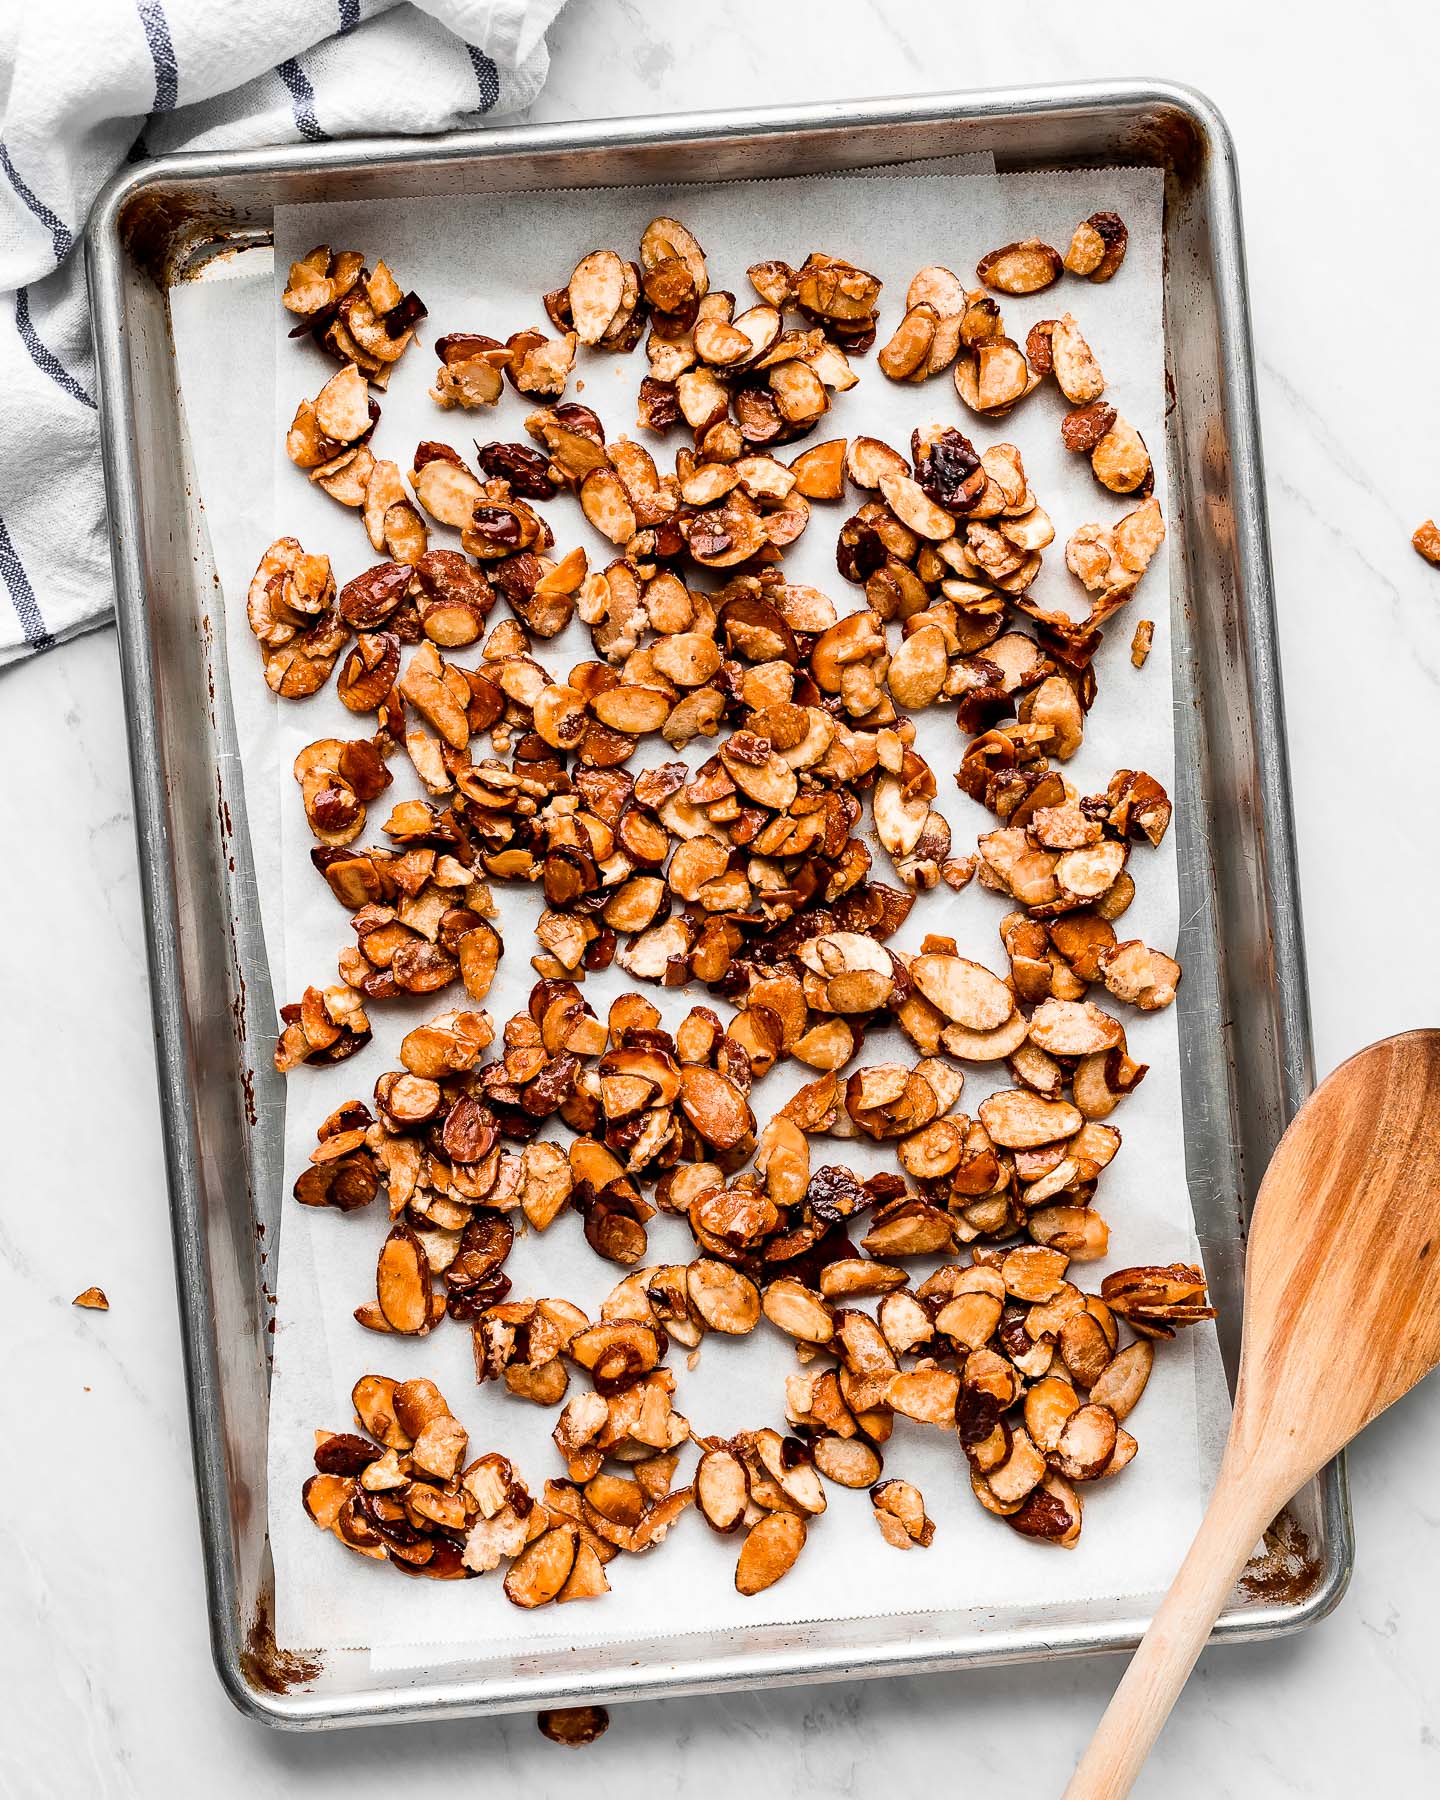 Caramelized nuts on a baking sheet with a wooden spoon resting on the corner and kitchen towel at the side.